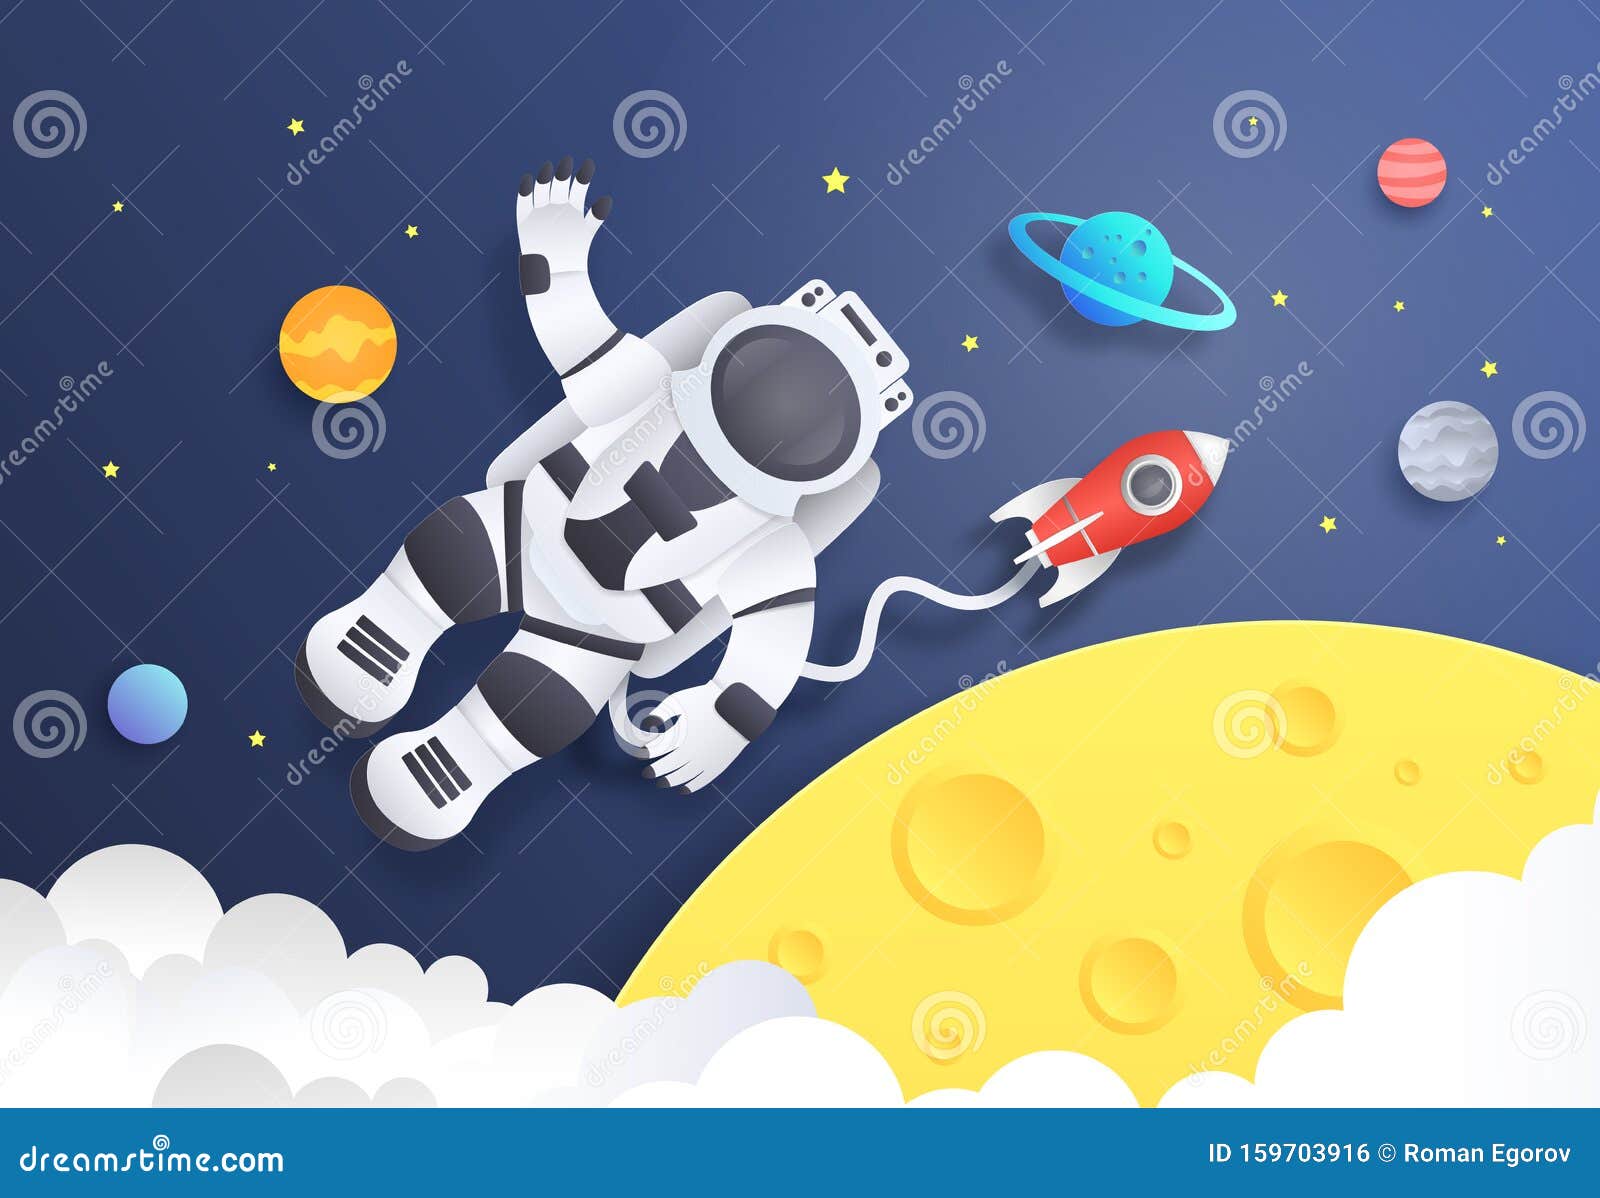 paper cut space. cartoon astronaut in cosmos with spaceship stars and planets, spaceman in galaxy.  background